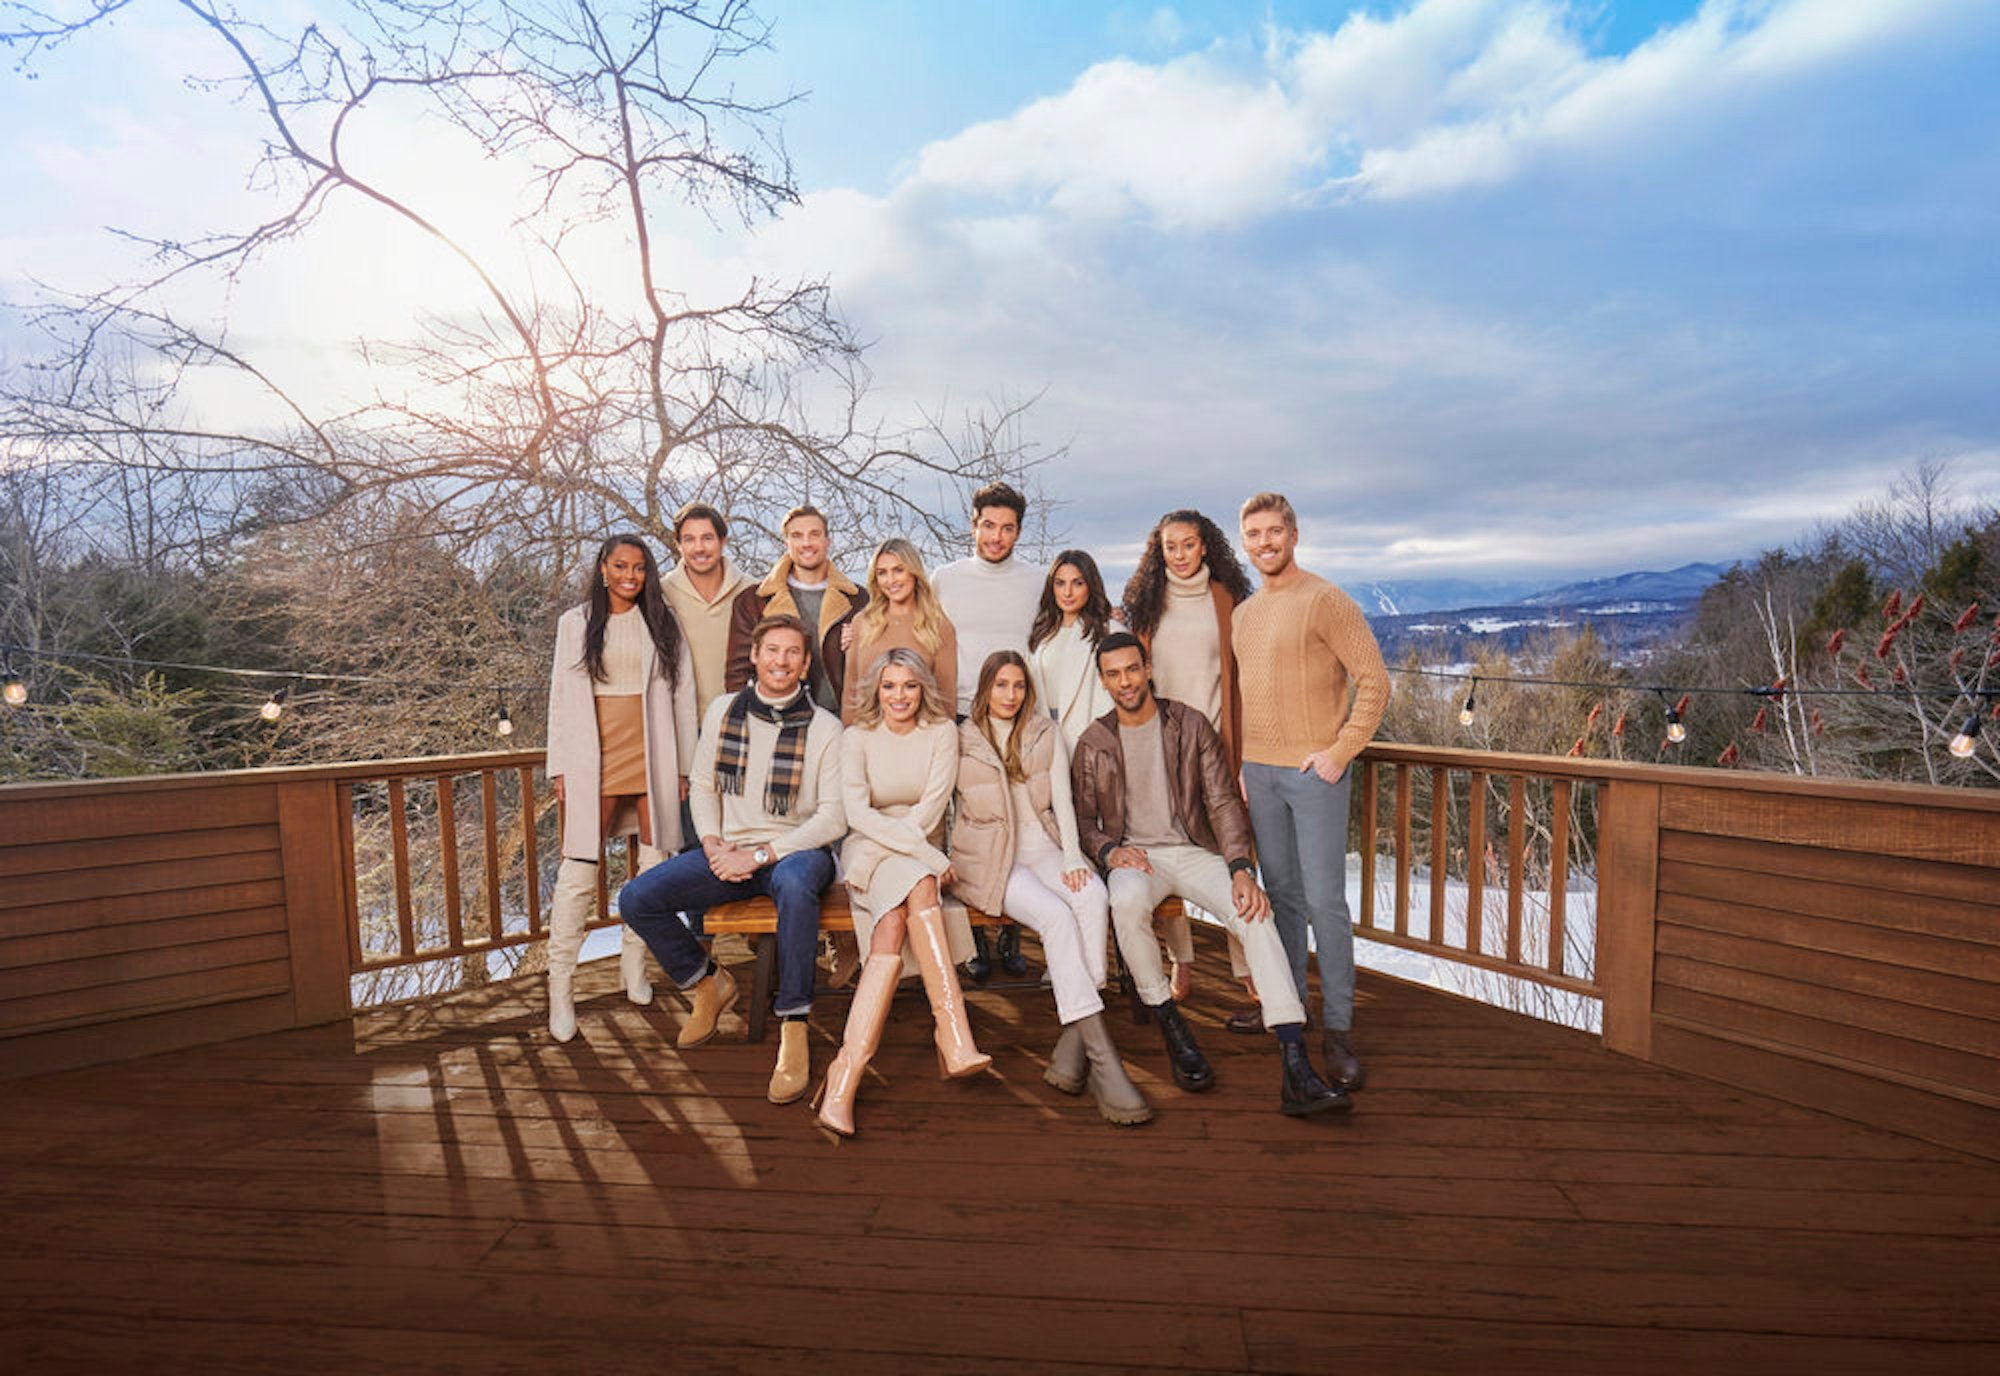 The cast of 'Winter House' pose on a balcony in front of snowy landscape in a promotional photo for 'Winter House